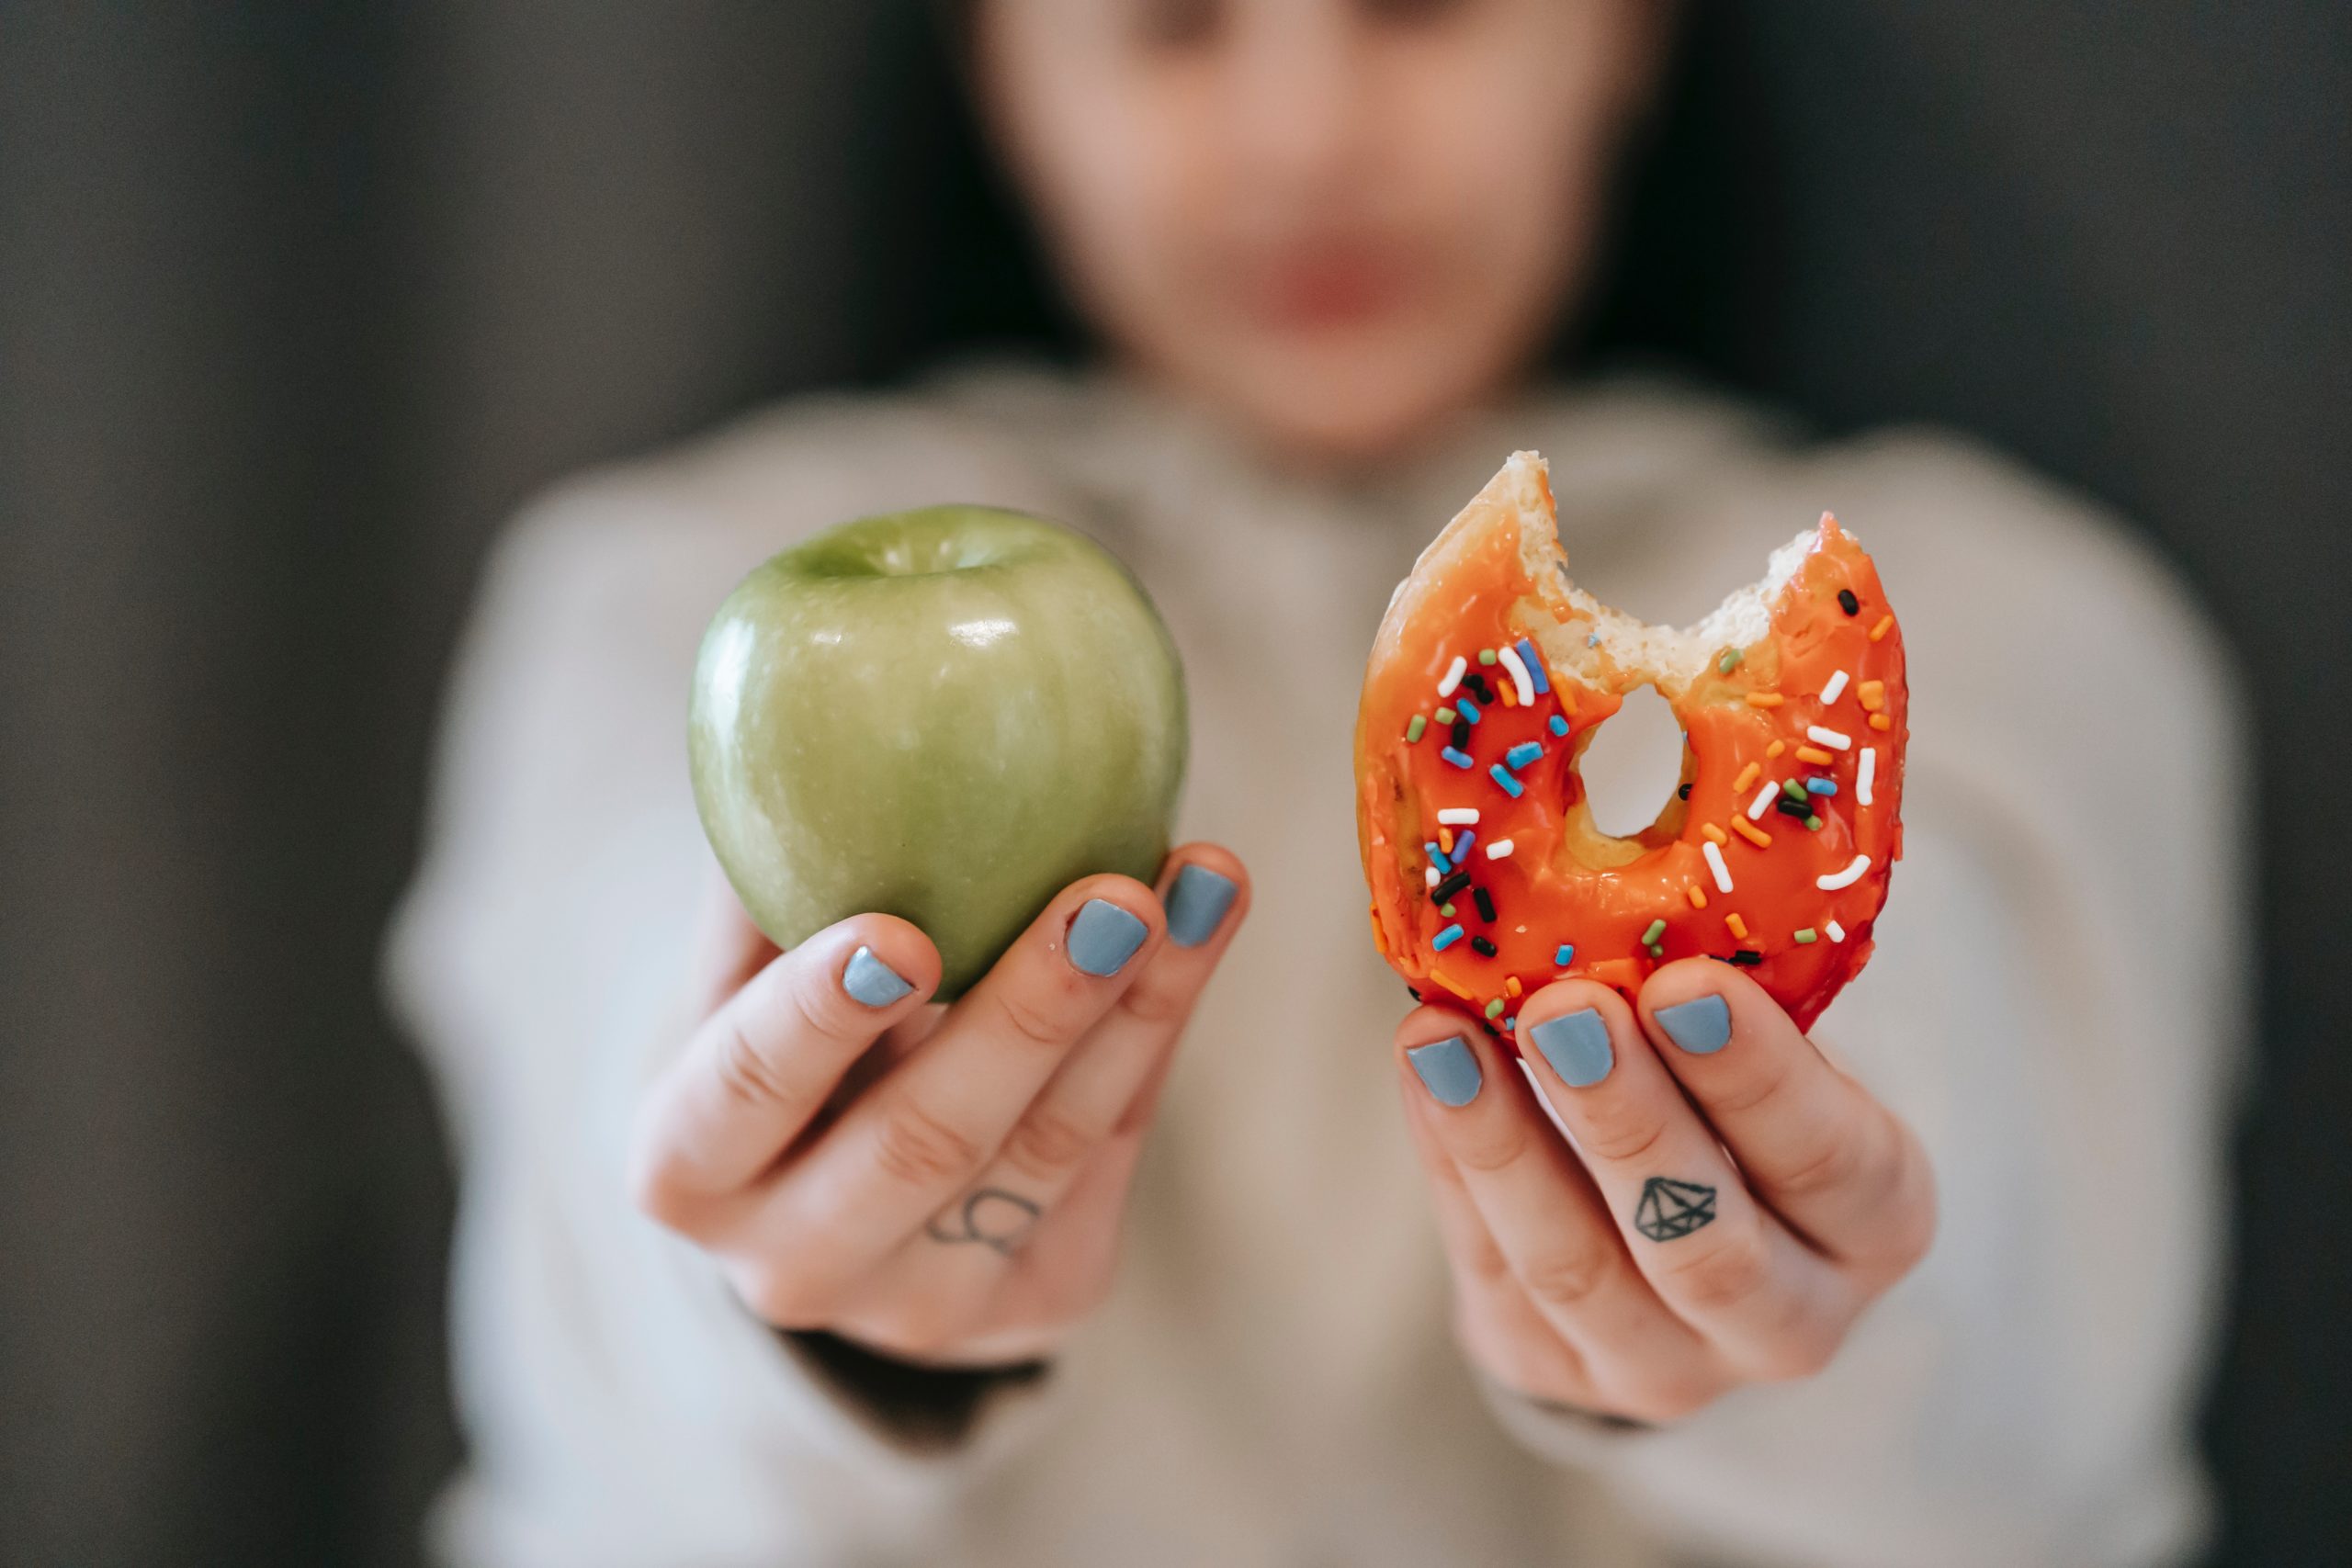 Woman holding up a green apple in one hand and a sprinkle donut in the other